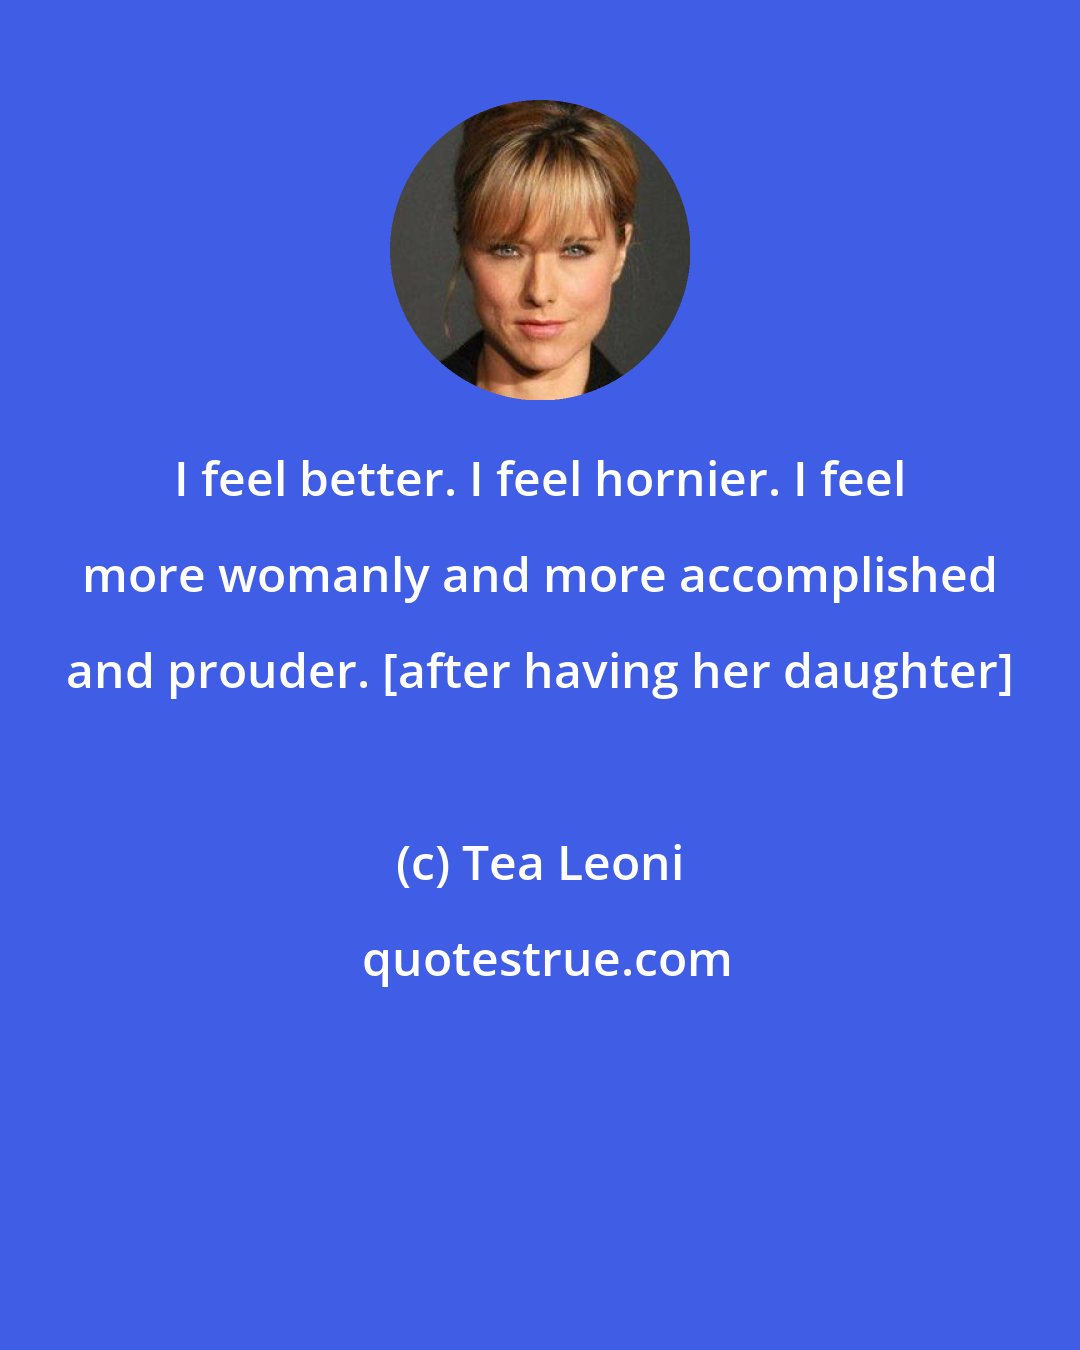 Tea Leoni: I feel better. I feel hornier. I feel more womanly and more accomplished and prouder. [after having her daughter]